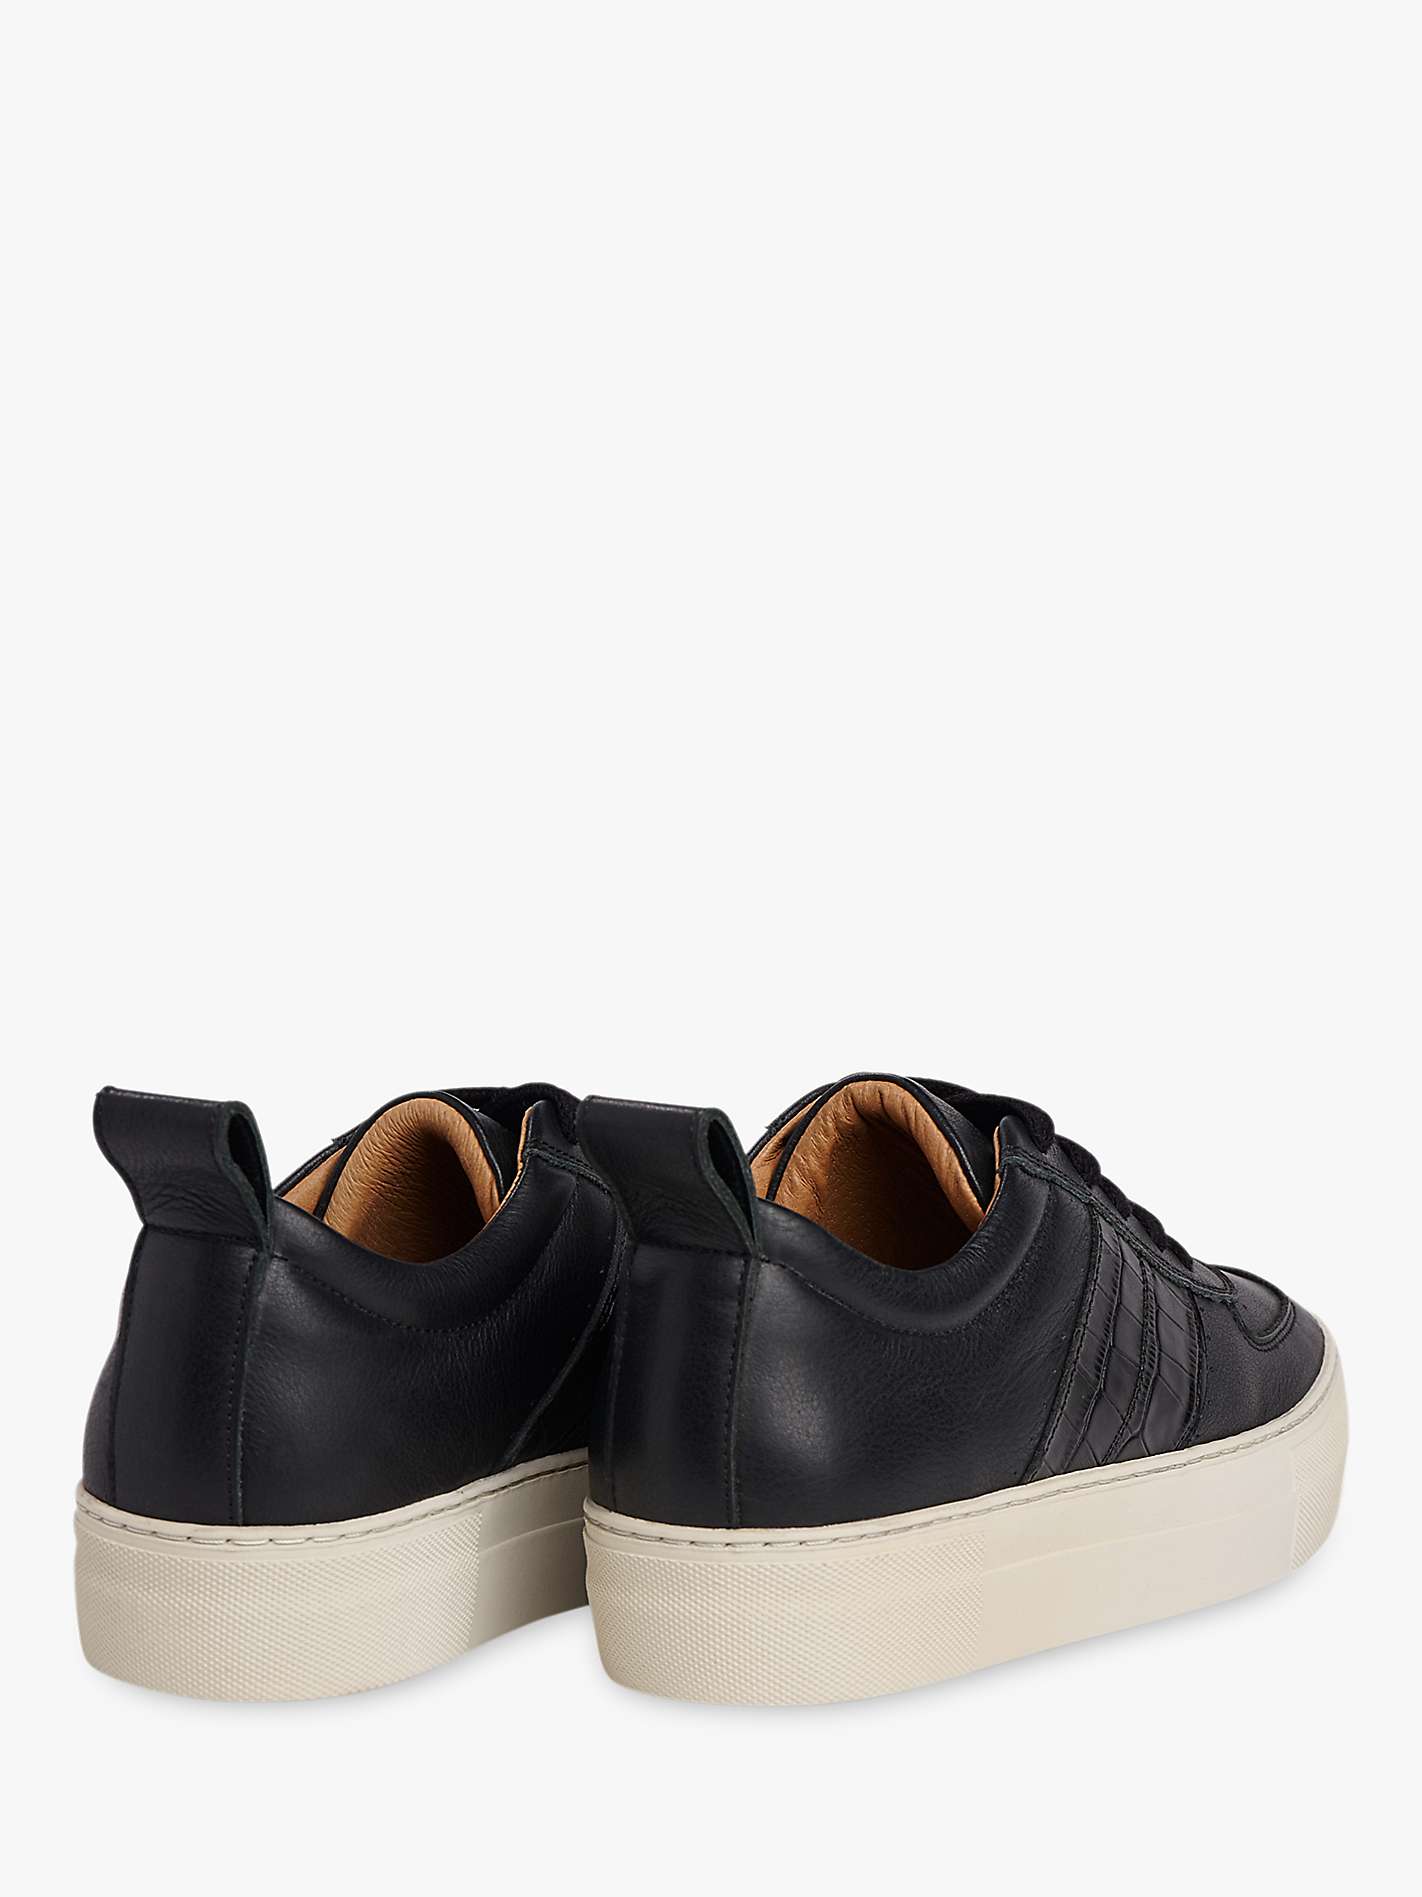 Buy Whistles Anna Deep Sole Trainers, Black Leather Online at johnlewis.com